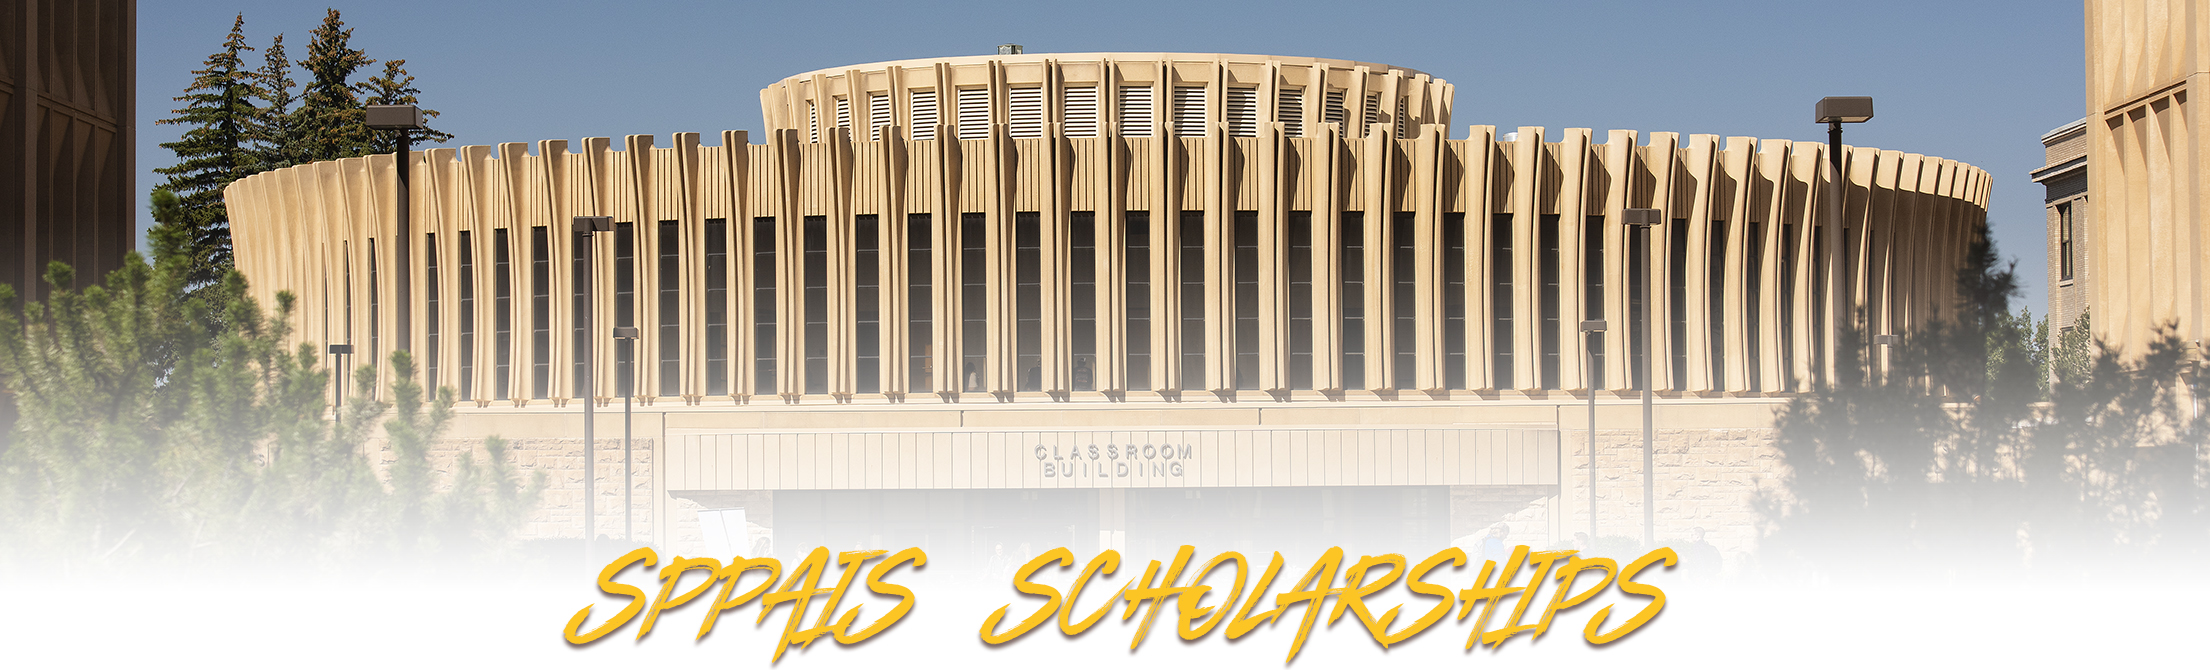 the UW classroom building with "SPPAIS Scholarships" printed on the image